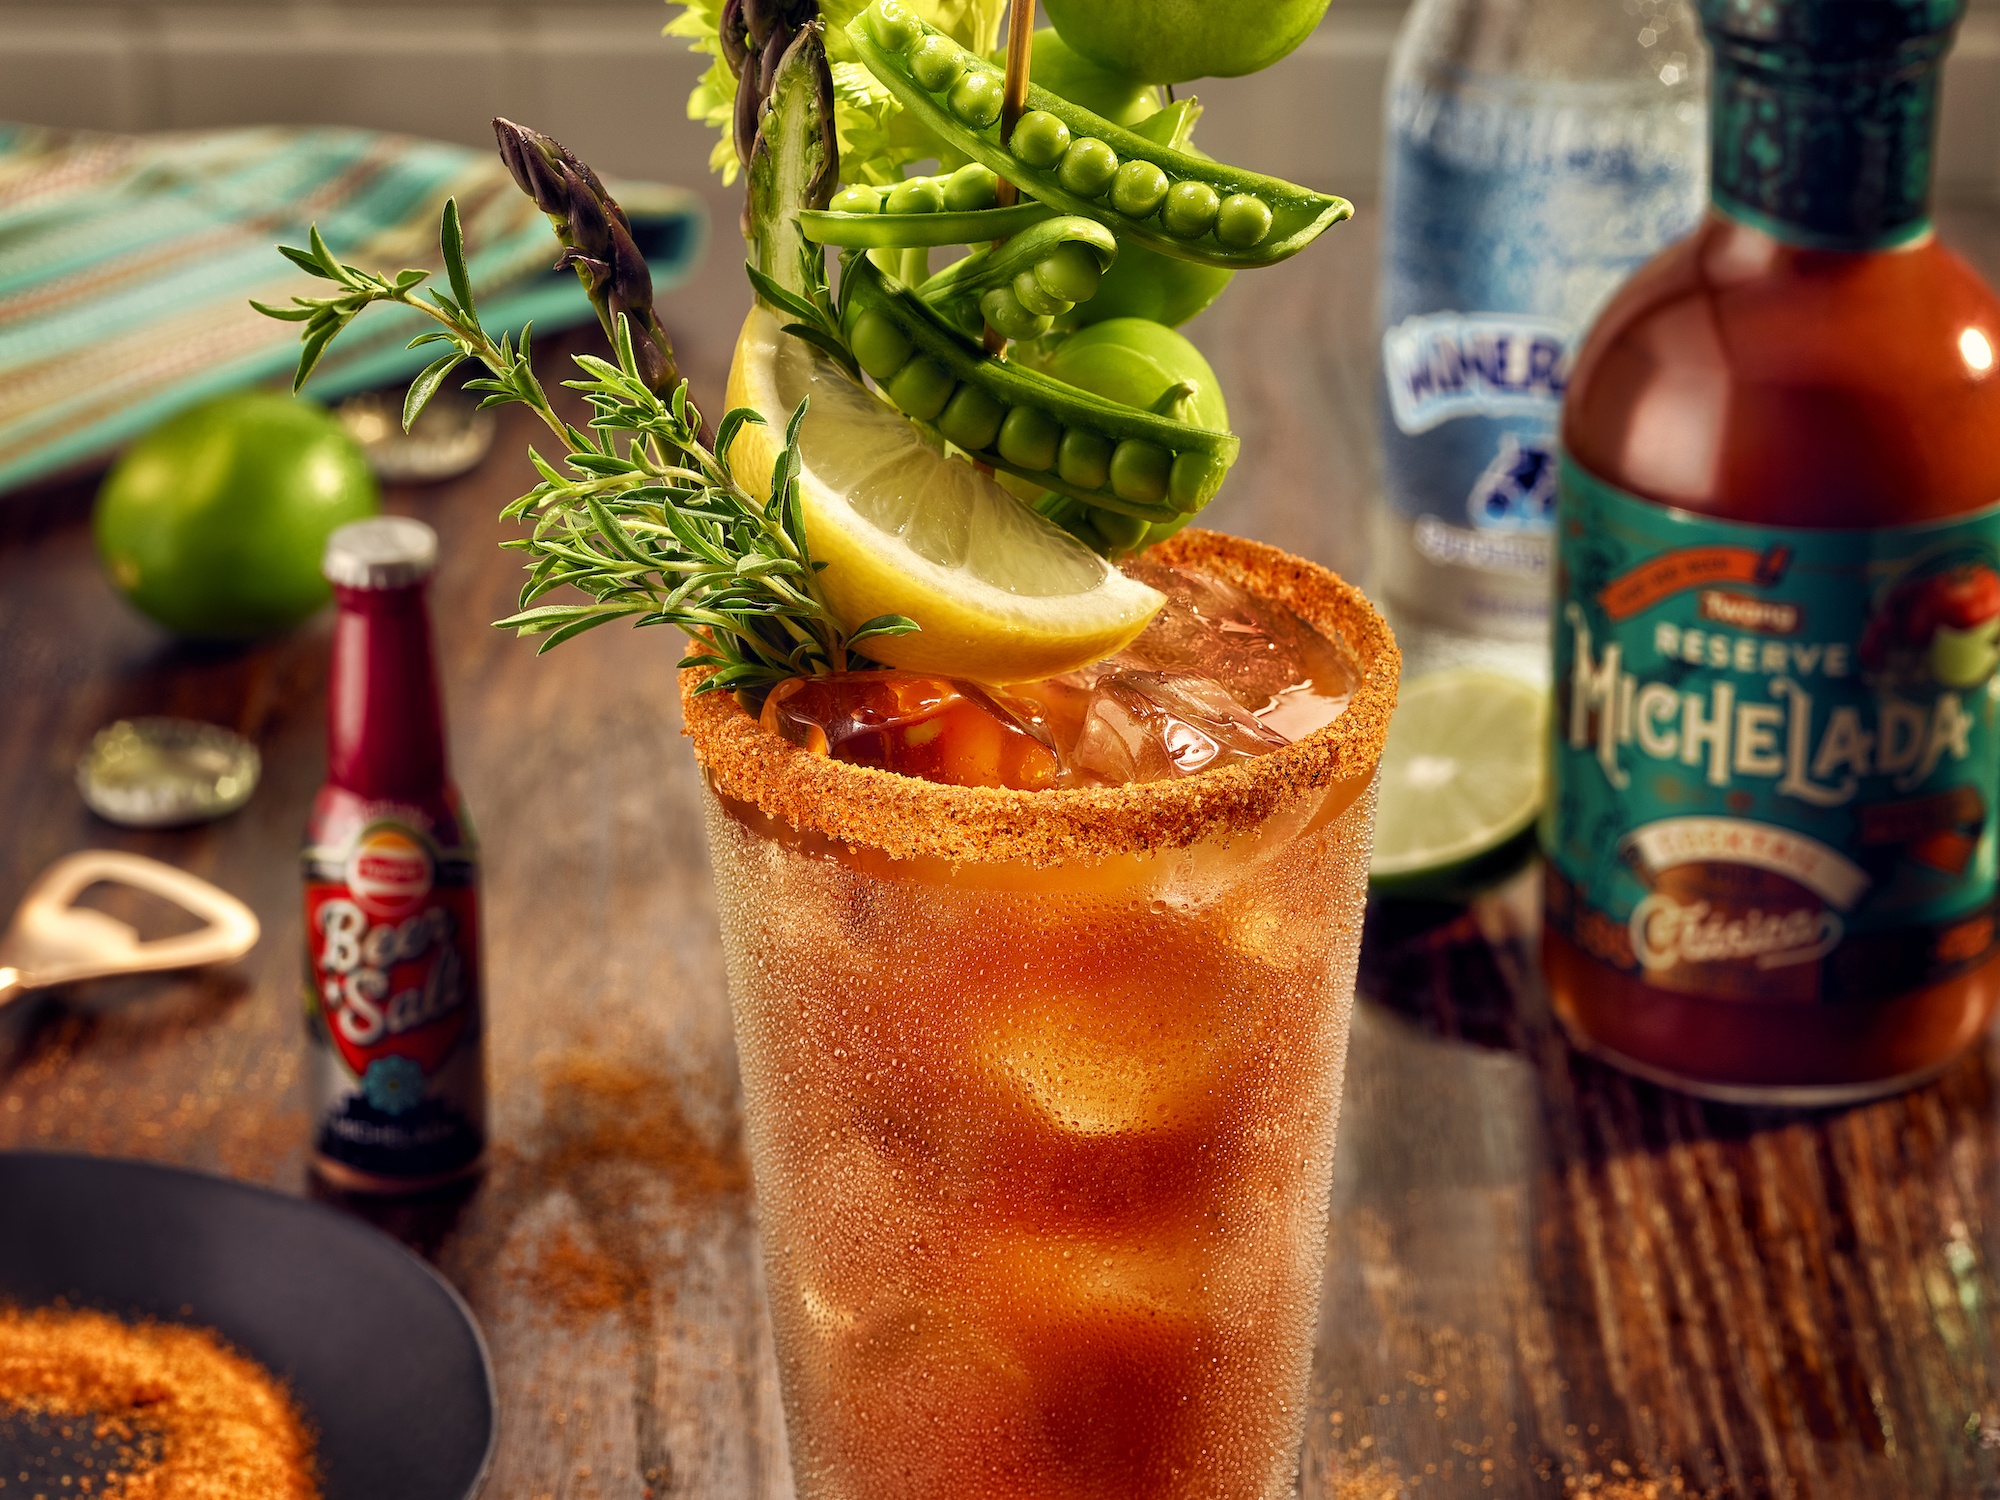 Celebrate National Michelada Day On July 12 With Twang's Michelada Mix